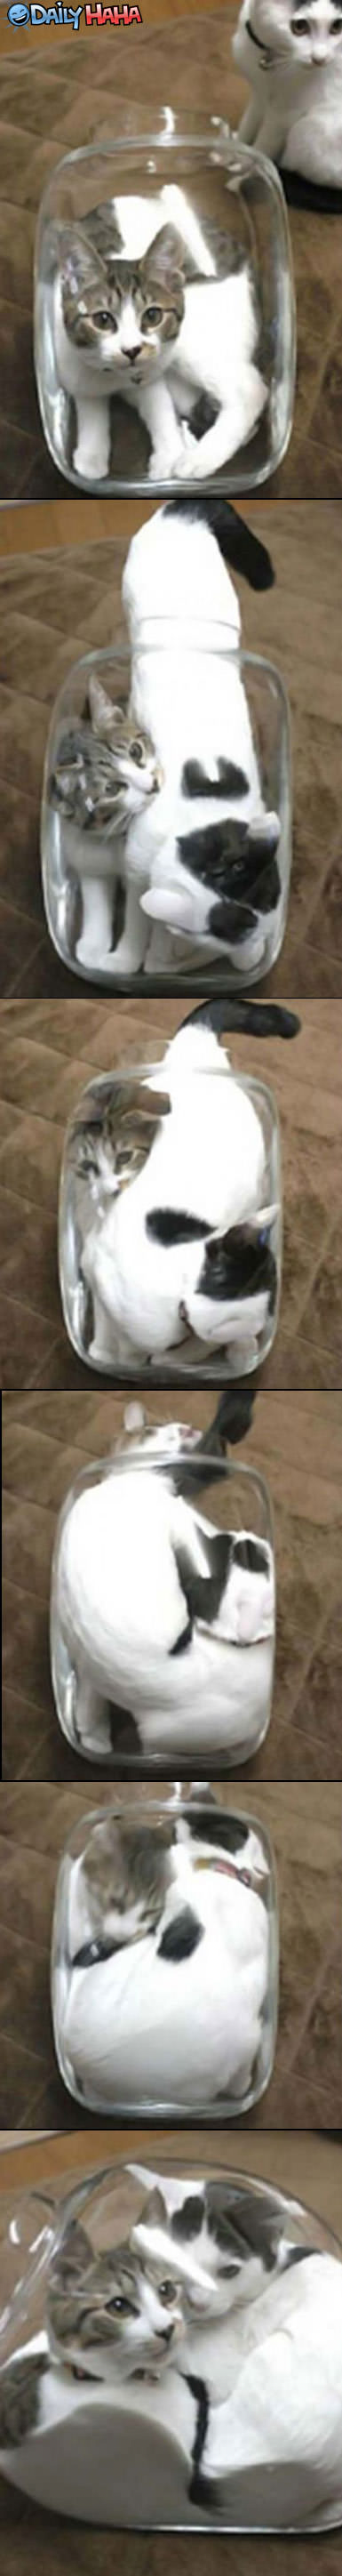 Jar of Cats Funny Picture